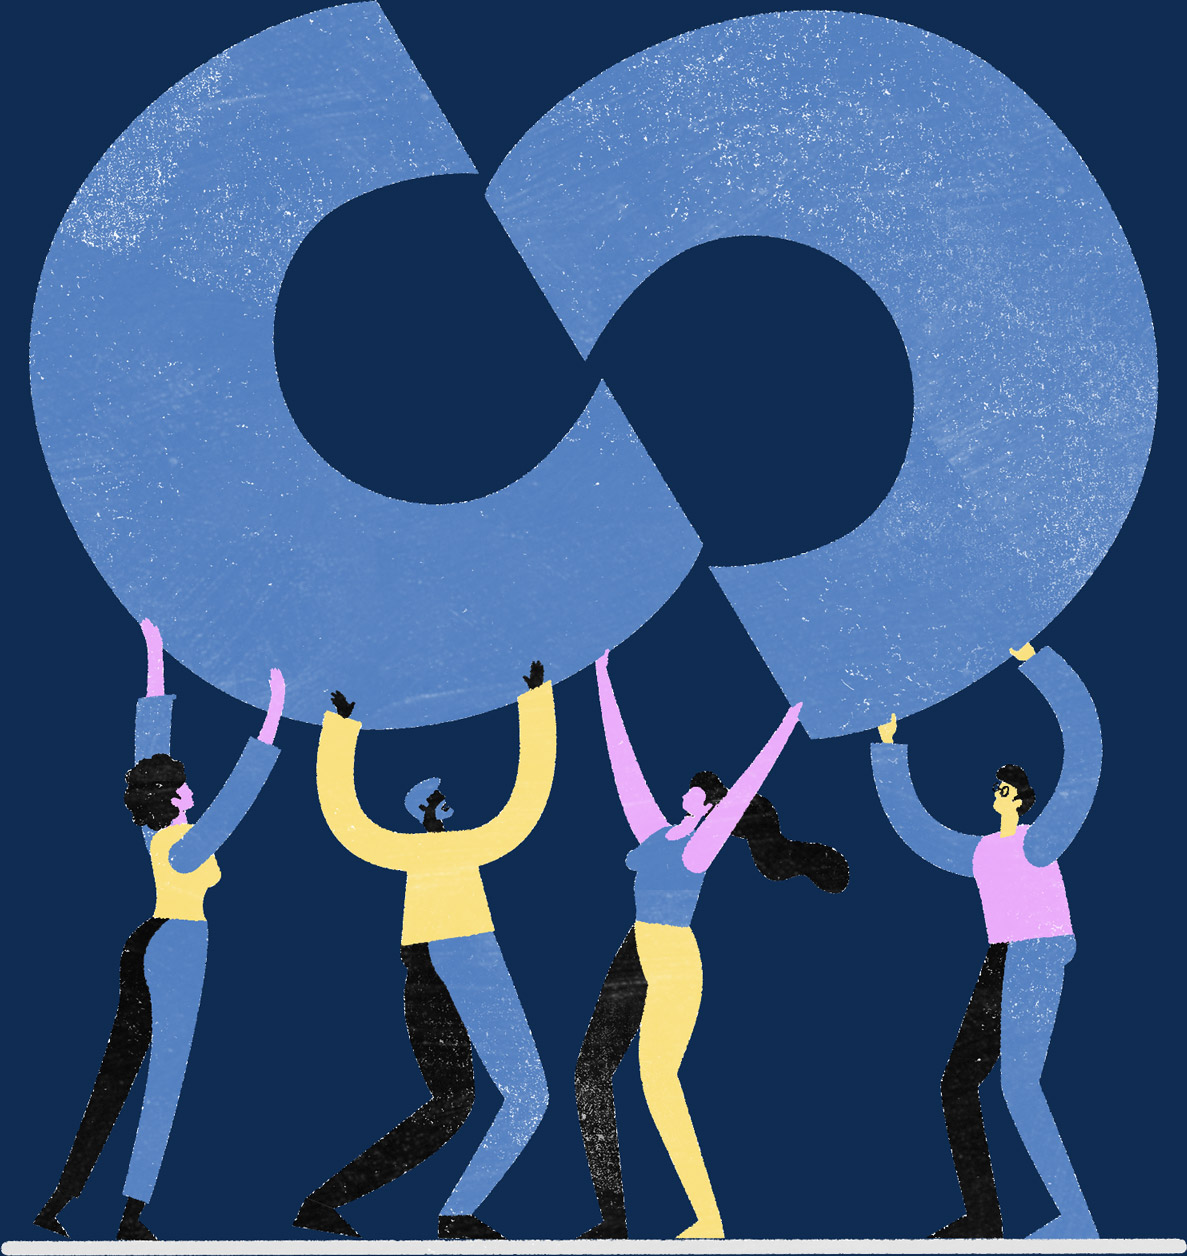 illustration depicting people holding up the Core Centennial logo